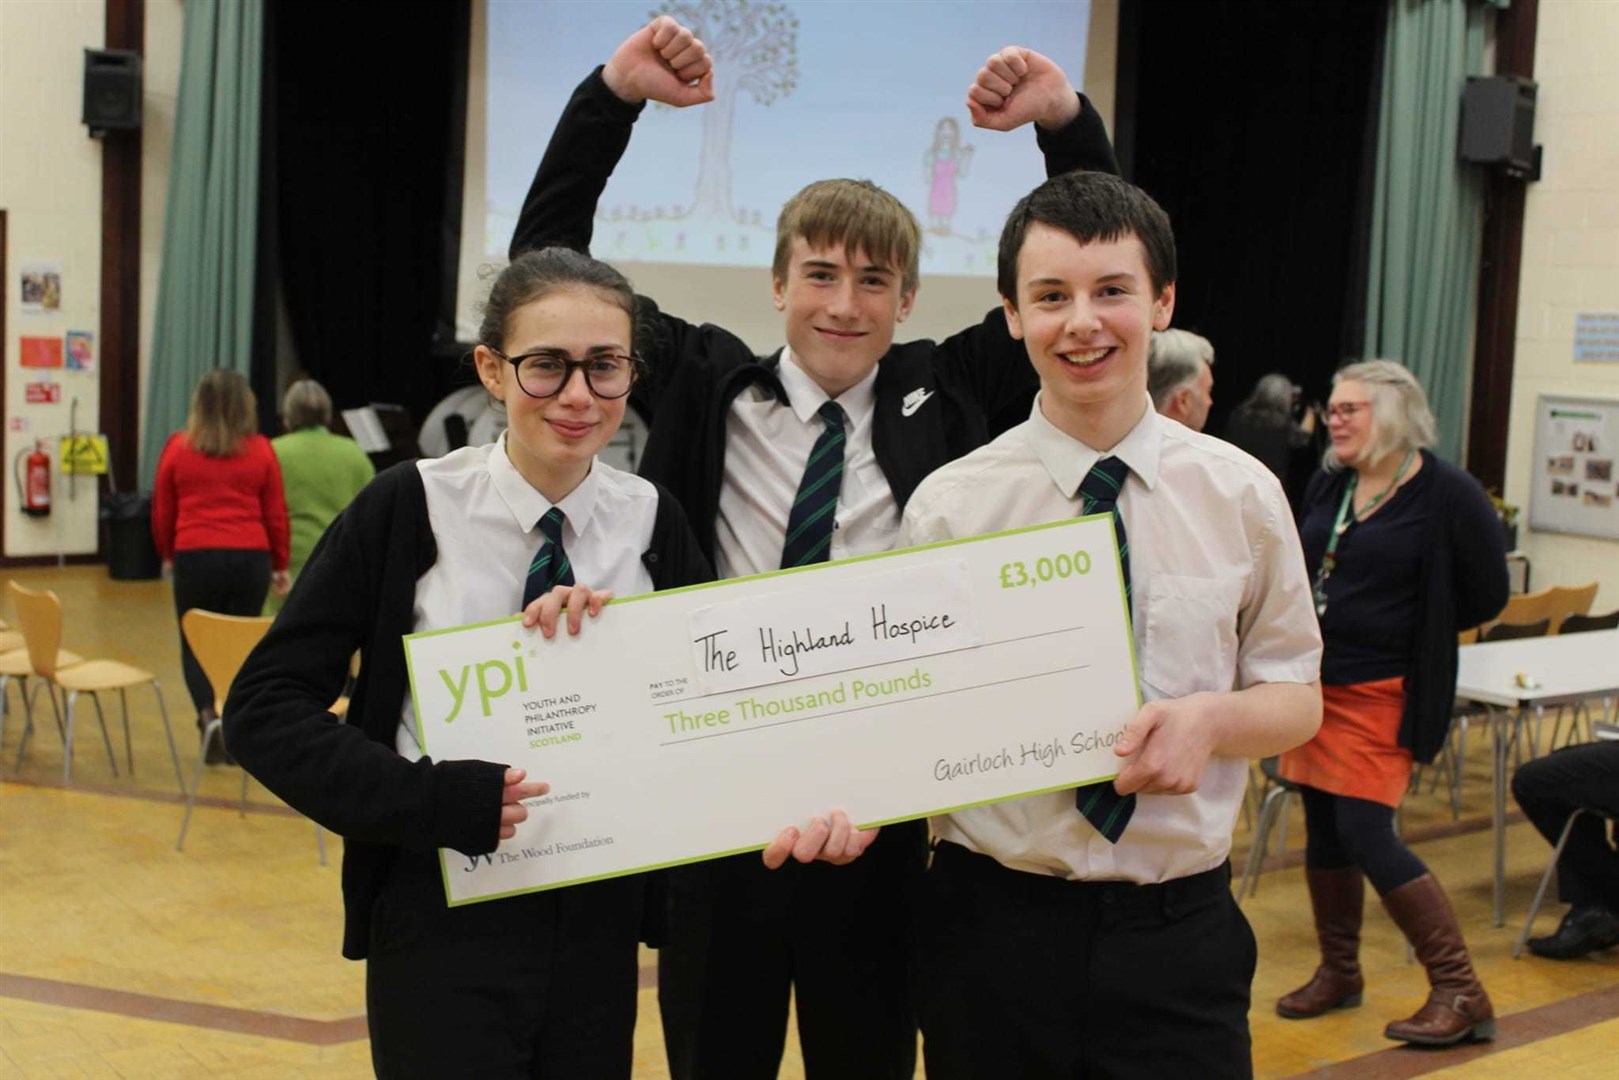 The YPI winning group.